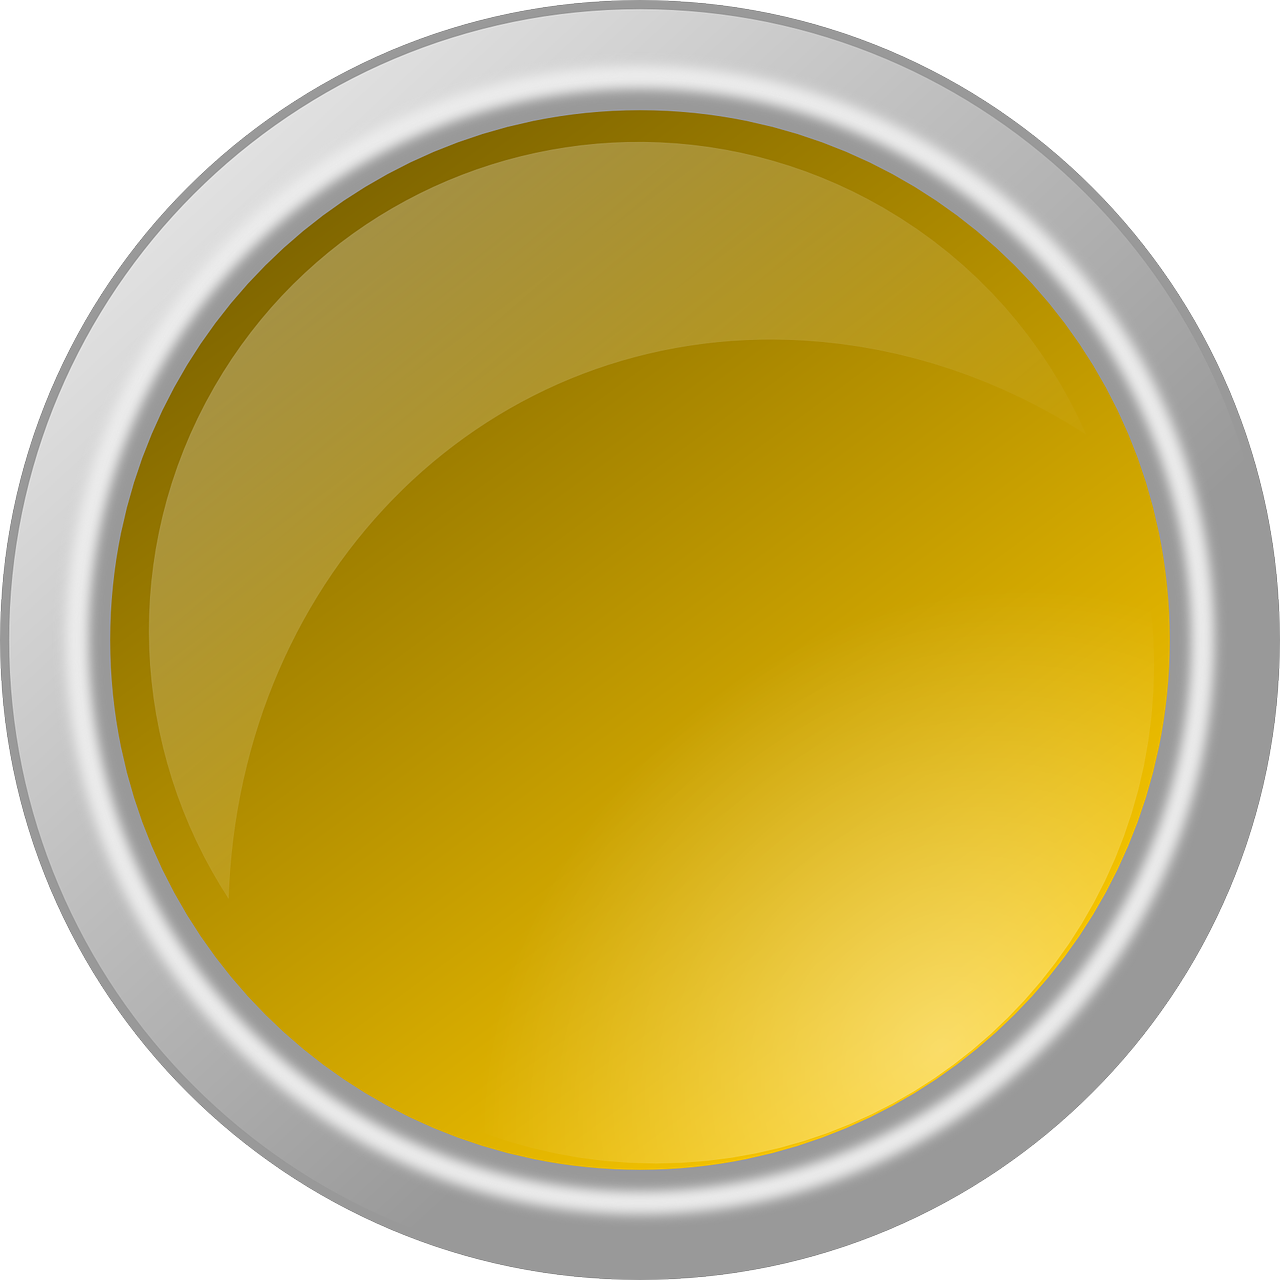 Download Button Glossy Round Circle Yellow Free Image From Needpix Com Yellowimages Mockups